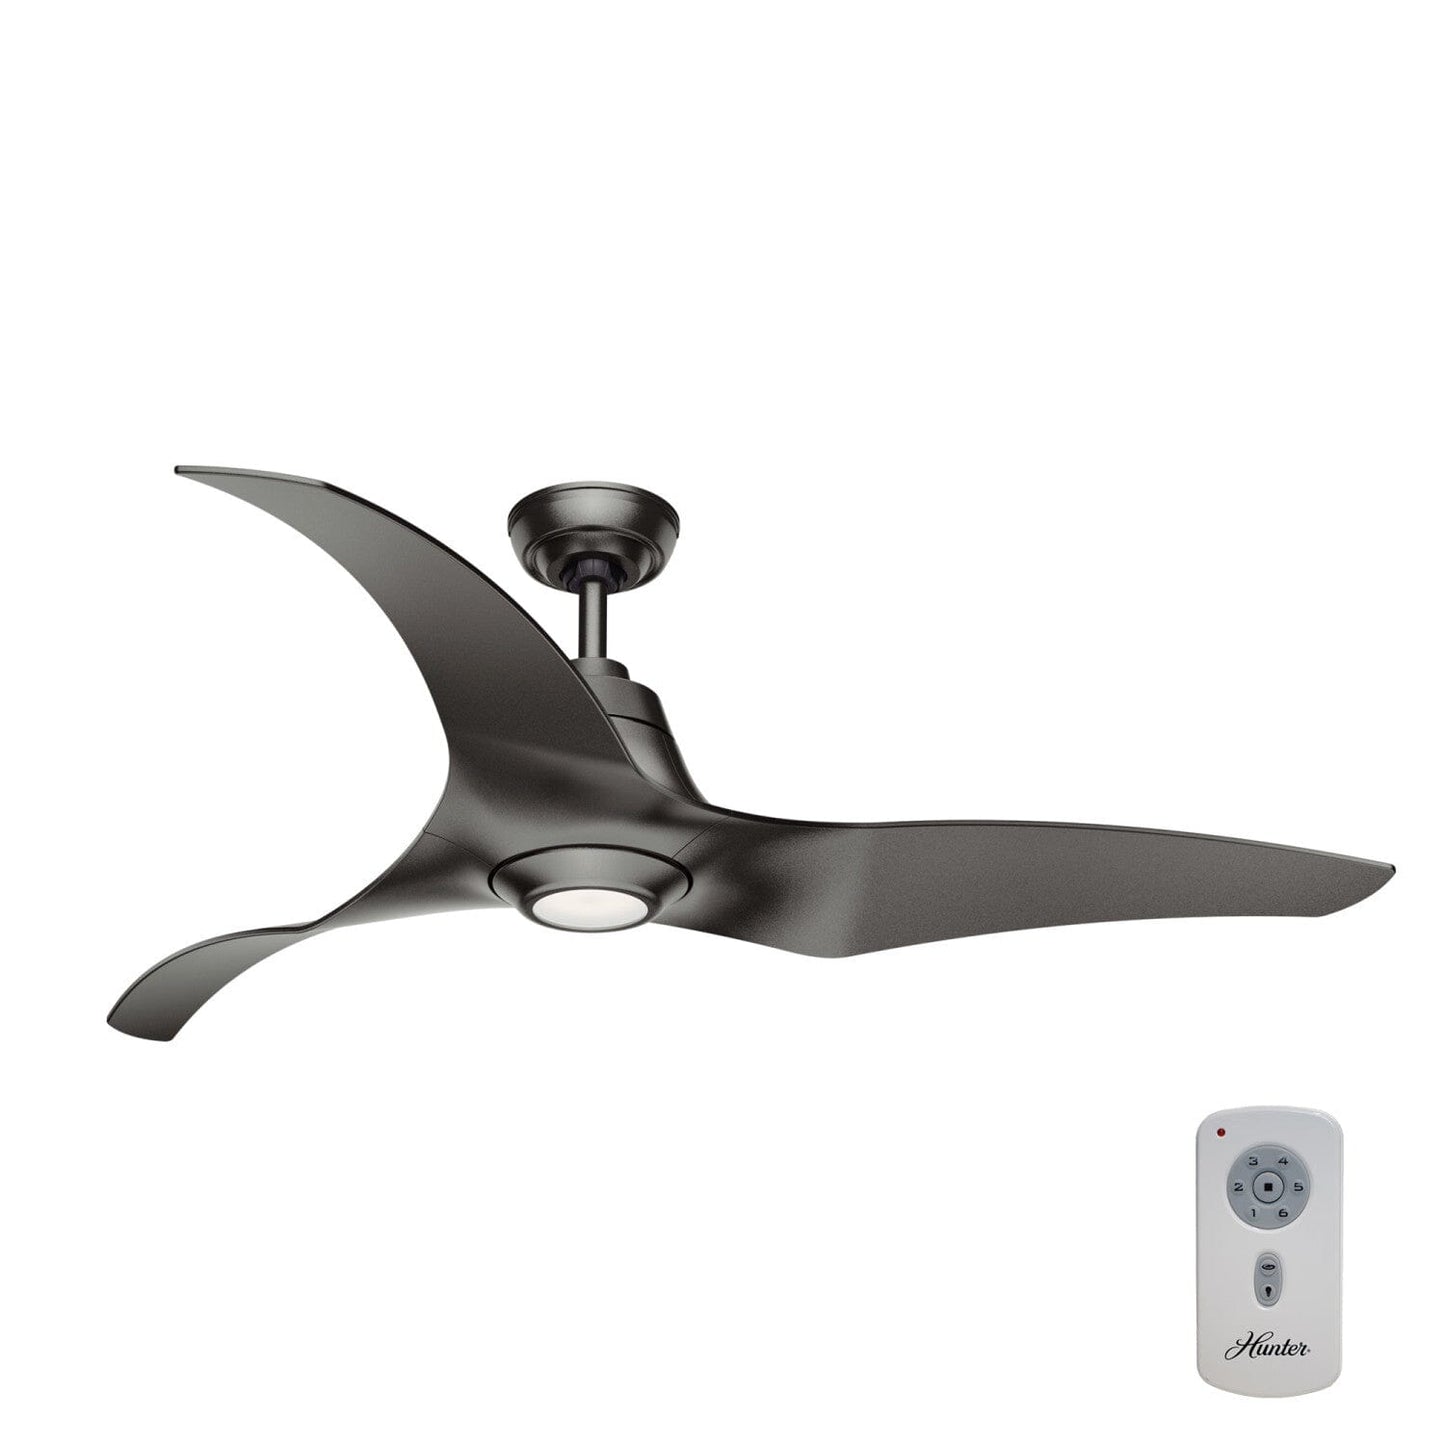 Arwen ENERGY STAR with LED Light 60 inch with Remote Control Ceiling Fans Hunter Granite - Granite 